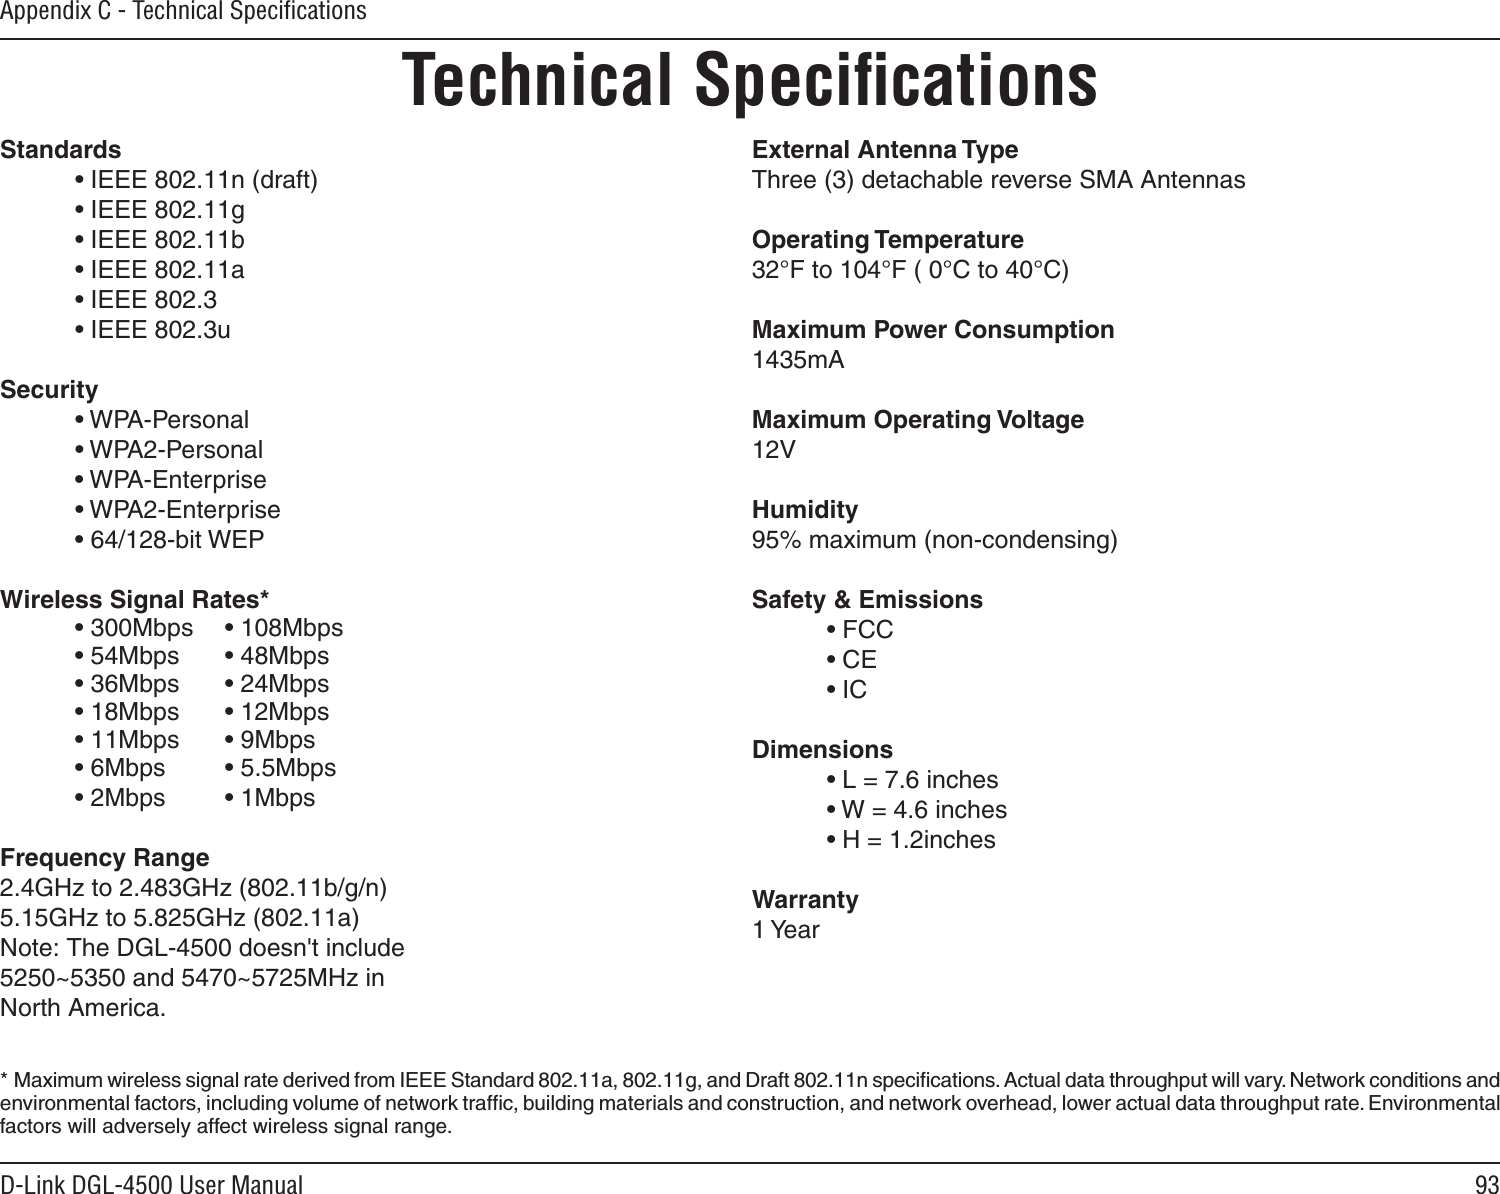 93D-Link DGL-4500 User ManualAppendix C - Technical SpeciﬁcationsTechnical SpeciﬁcationsStandards • IEEE 802.11n (draft) • IEEE 802.11g • IEEE 802.11b • IEEE 802.11a • IEEE 802.3 • IEEE 802.3uSecurity • WPA-Personal • WPA2-Personal • WPA-Enterprise • WPA2-Enterprise • 64/128-bit WEPWireless Signal Rates* • 300Mbps  • 108Mbps • 54Mbps • 48Mbps • 36Mbps • 24Mbps • 18Mbps  • 12Mbps • 11Mbps  • 9Mbps • 6Mbps  • 5.5Mbps  • 2Mbps • 1Mbps     Frequency Range2.4GHz to 2.483GHz (802.11b/g/n)5.15GHz to 5.825GHz (802.11a)Note: The DGL-4500 doesn&apos;t include5250~5350 and 5470~5725MHz in North America.External Antenna TypeThree (3) detachable reverse SMA AntennasOperating Temperature32°F to 104°F ( 0°C to 40°C)Maximum Power Consumption1435mAMaximum Operating Voltage12VHumidity95% maximum (non-condensing)Safety &amp; Emissions • FCC   • CE • IC Dimensions • L = 7.6 inches • W = 4.6 inches • H = 1.2inchesWarranty1 Year*  Maximum wireless signal rate derived from IEEE Standard 802.11a, 802.11g, and Draft 802.11n speciﬁcations. Actual data throughput will vary. Network conditions and environmental factors, including volume of network trafﬁc, building materials and construction, and network overhead, lower actual data throughput rate. Environmental factors will adversely affect wireless signal range.